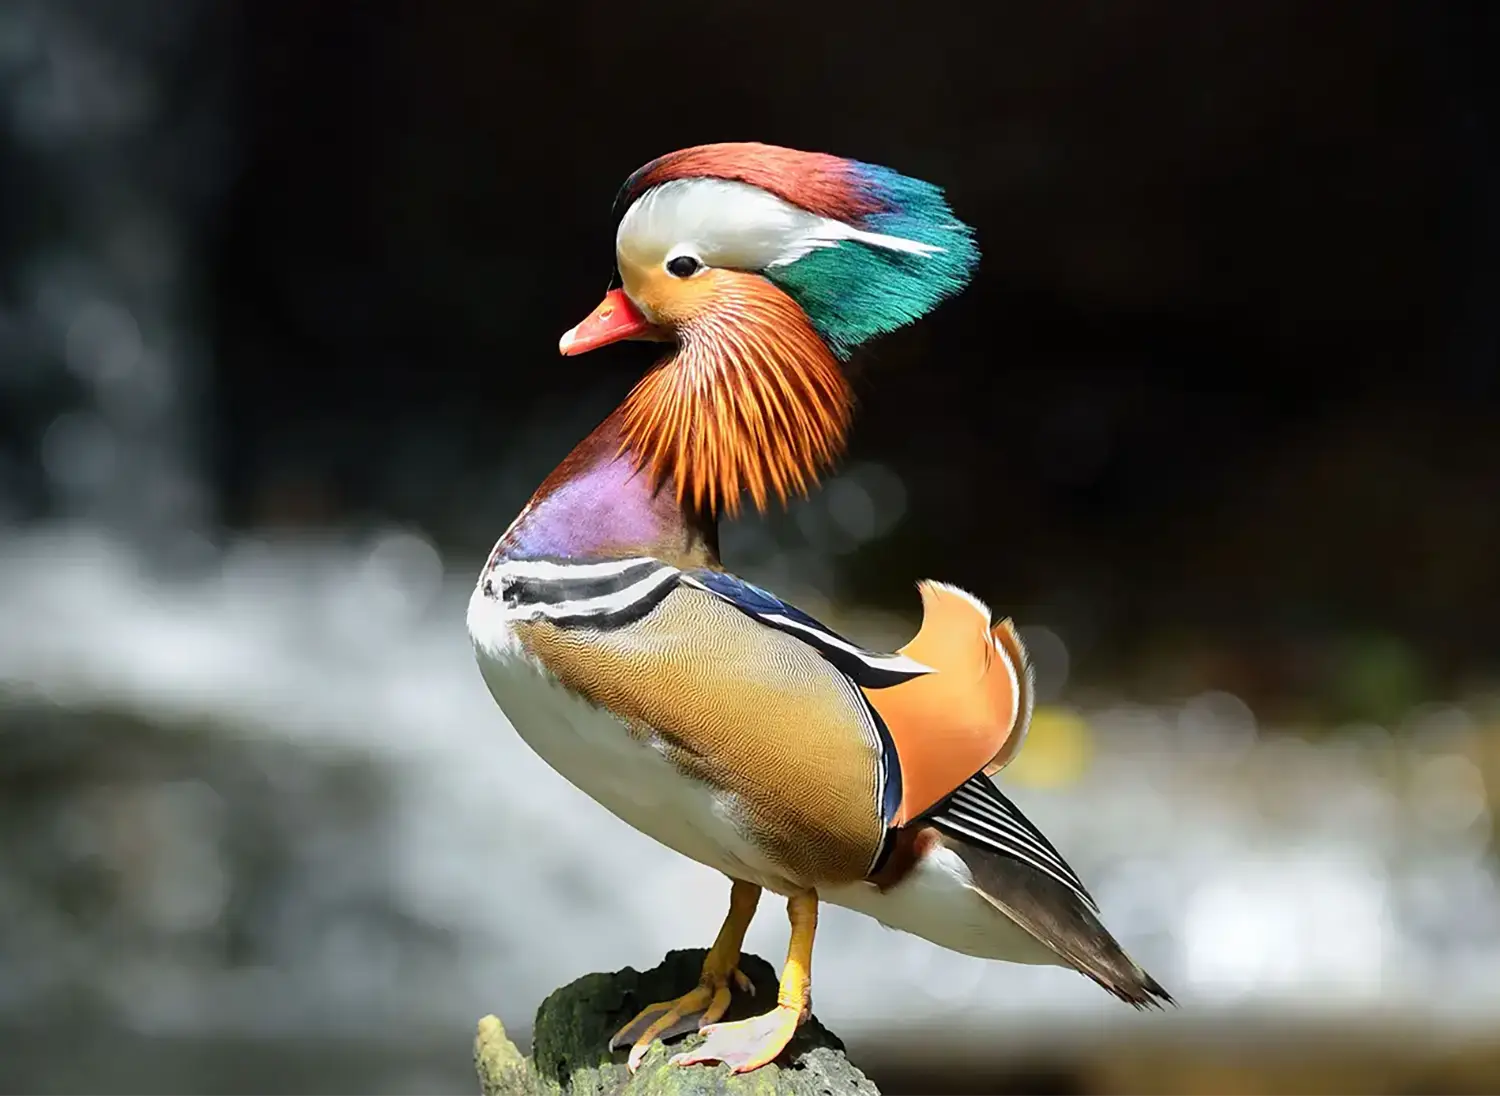 A brightly multi-colored and textured mandarin duck.